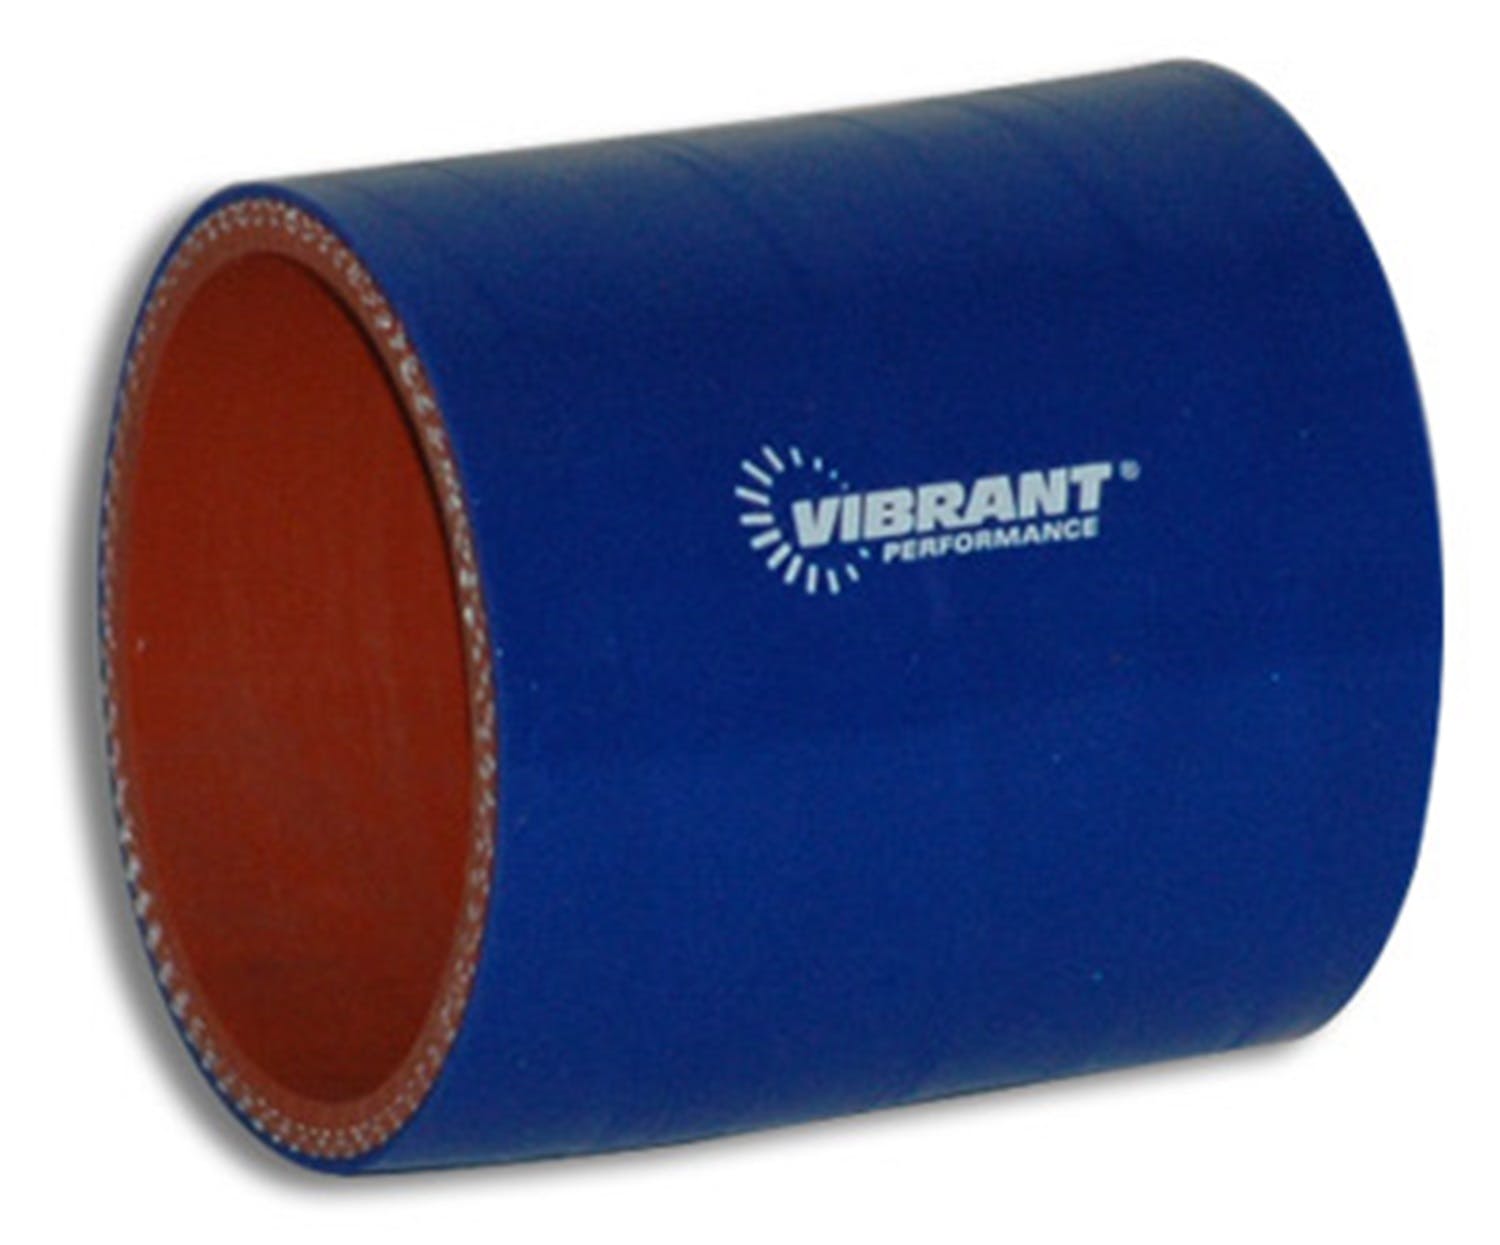 Vibrant Performance 2710B 4 Ply Silicone Sleeve, 2.5 inch I.D. x 3 inch Long - Blue